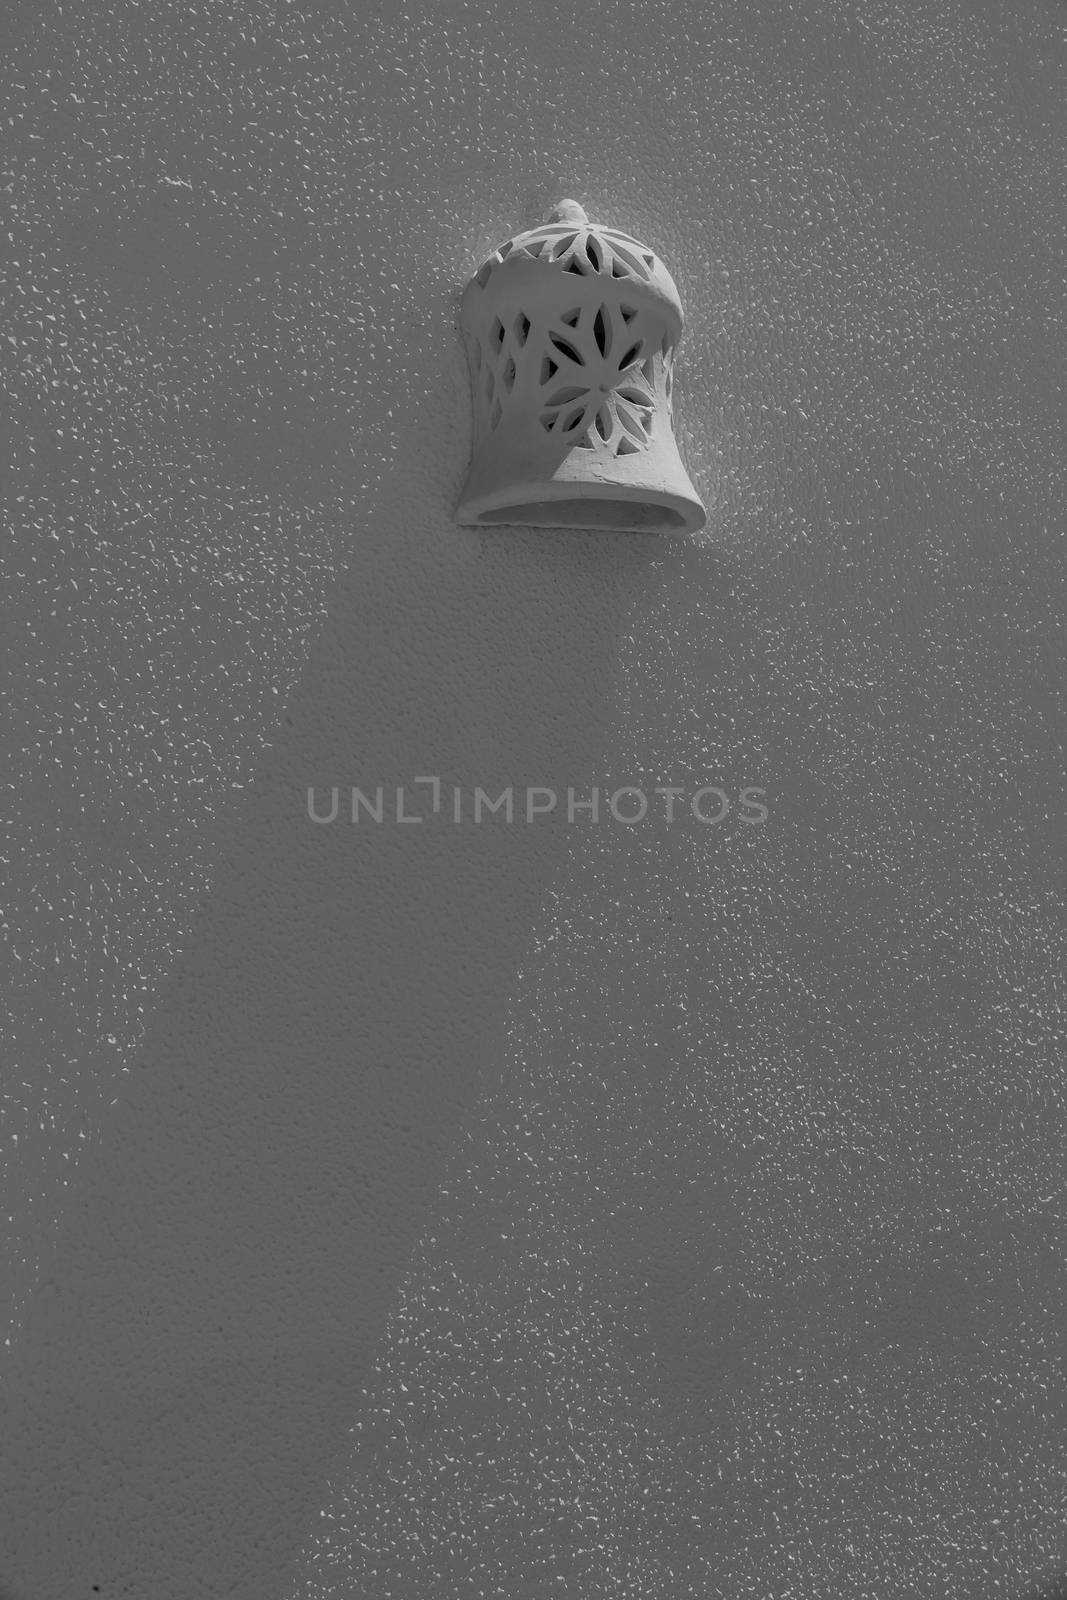 decorative light on the white wall by master1305